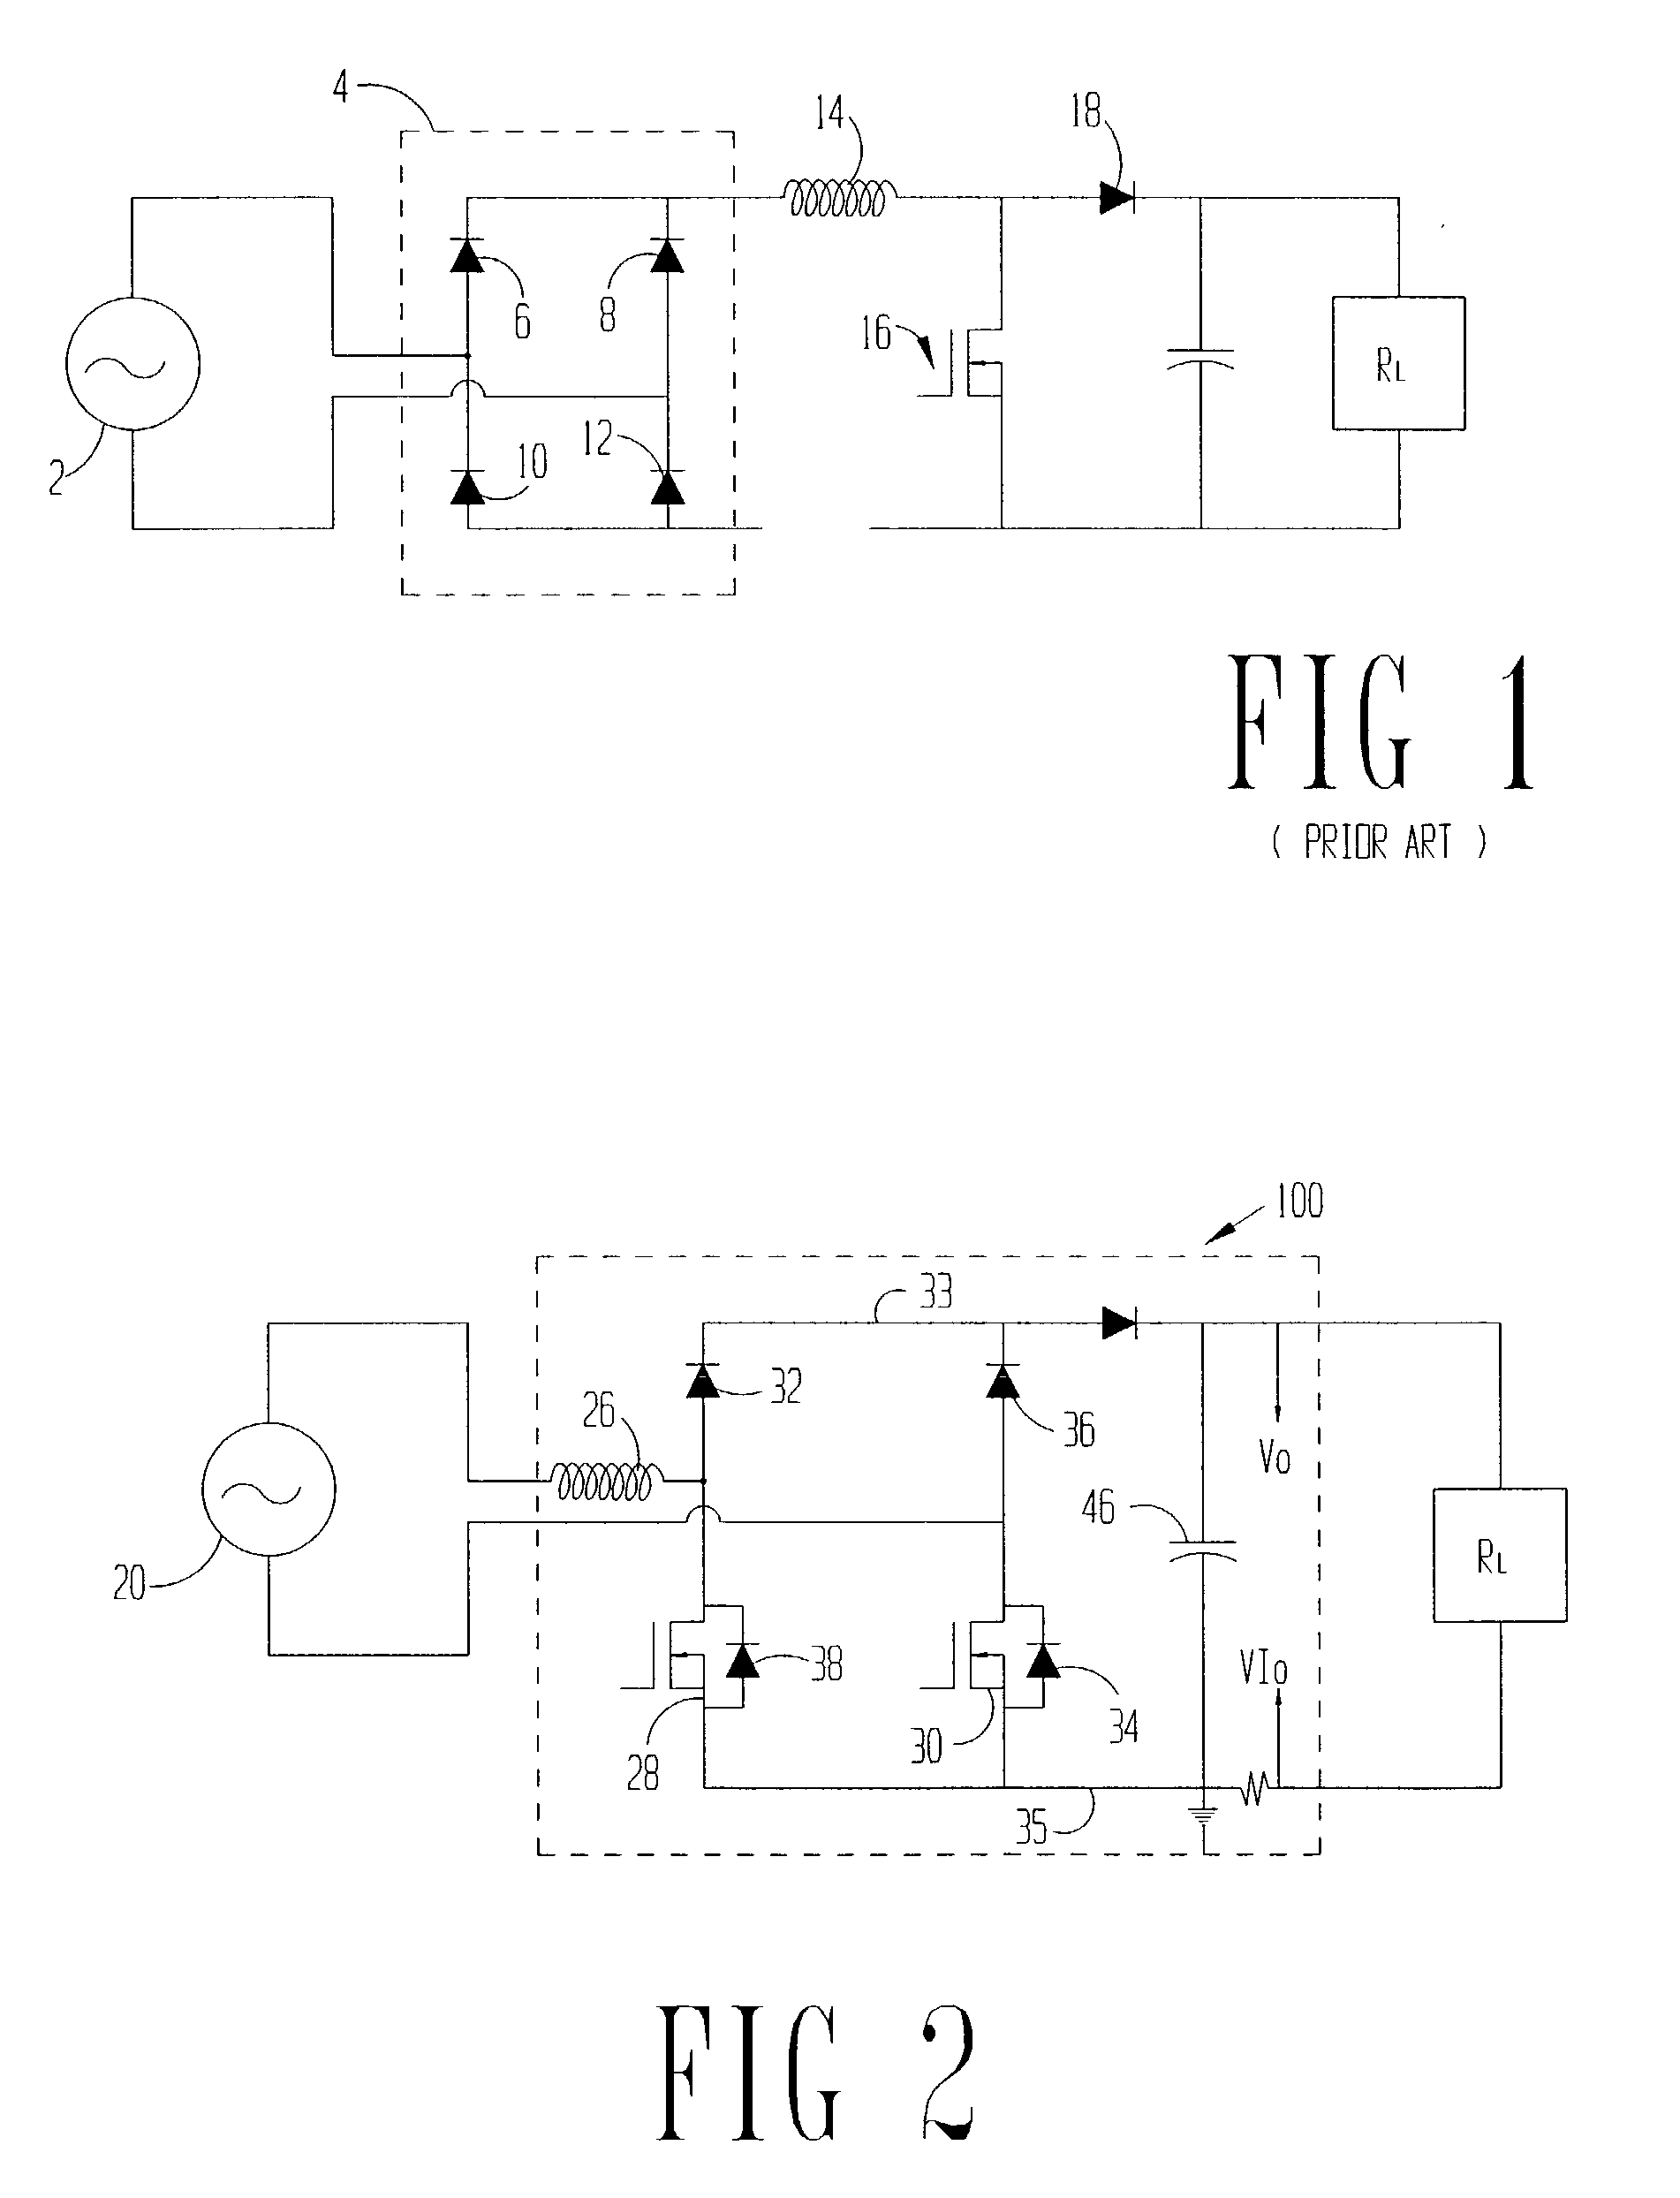 Power supply with integrated bridge and boost circuit